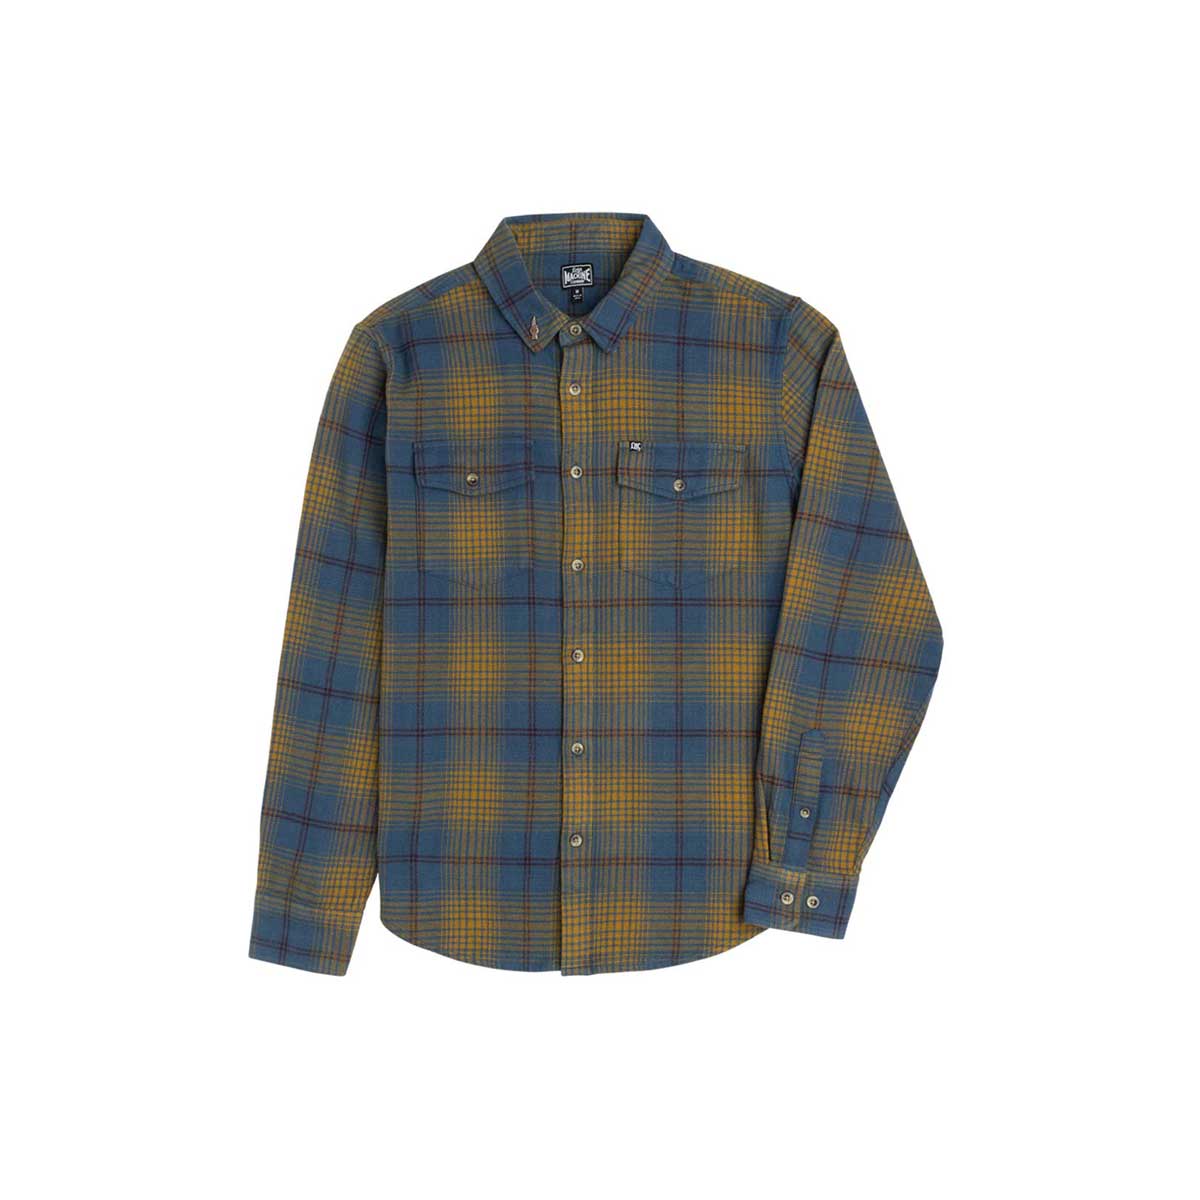 Loser Machine Hovley Flannel Shirt – Navy/Gold